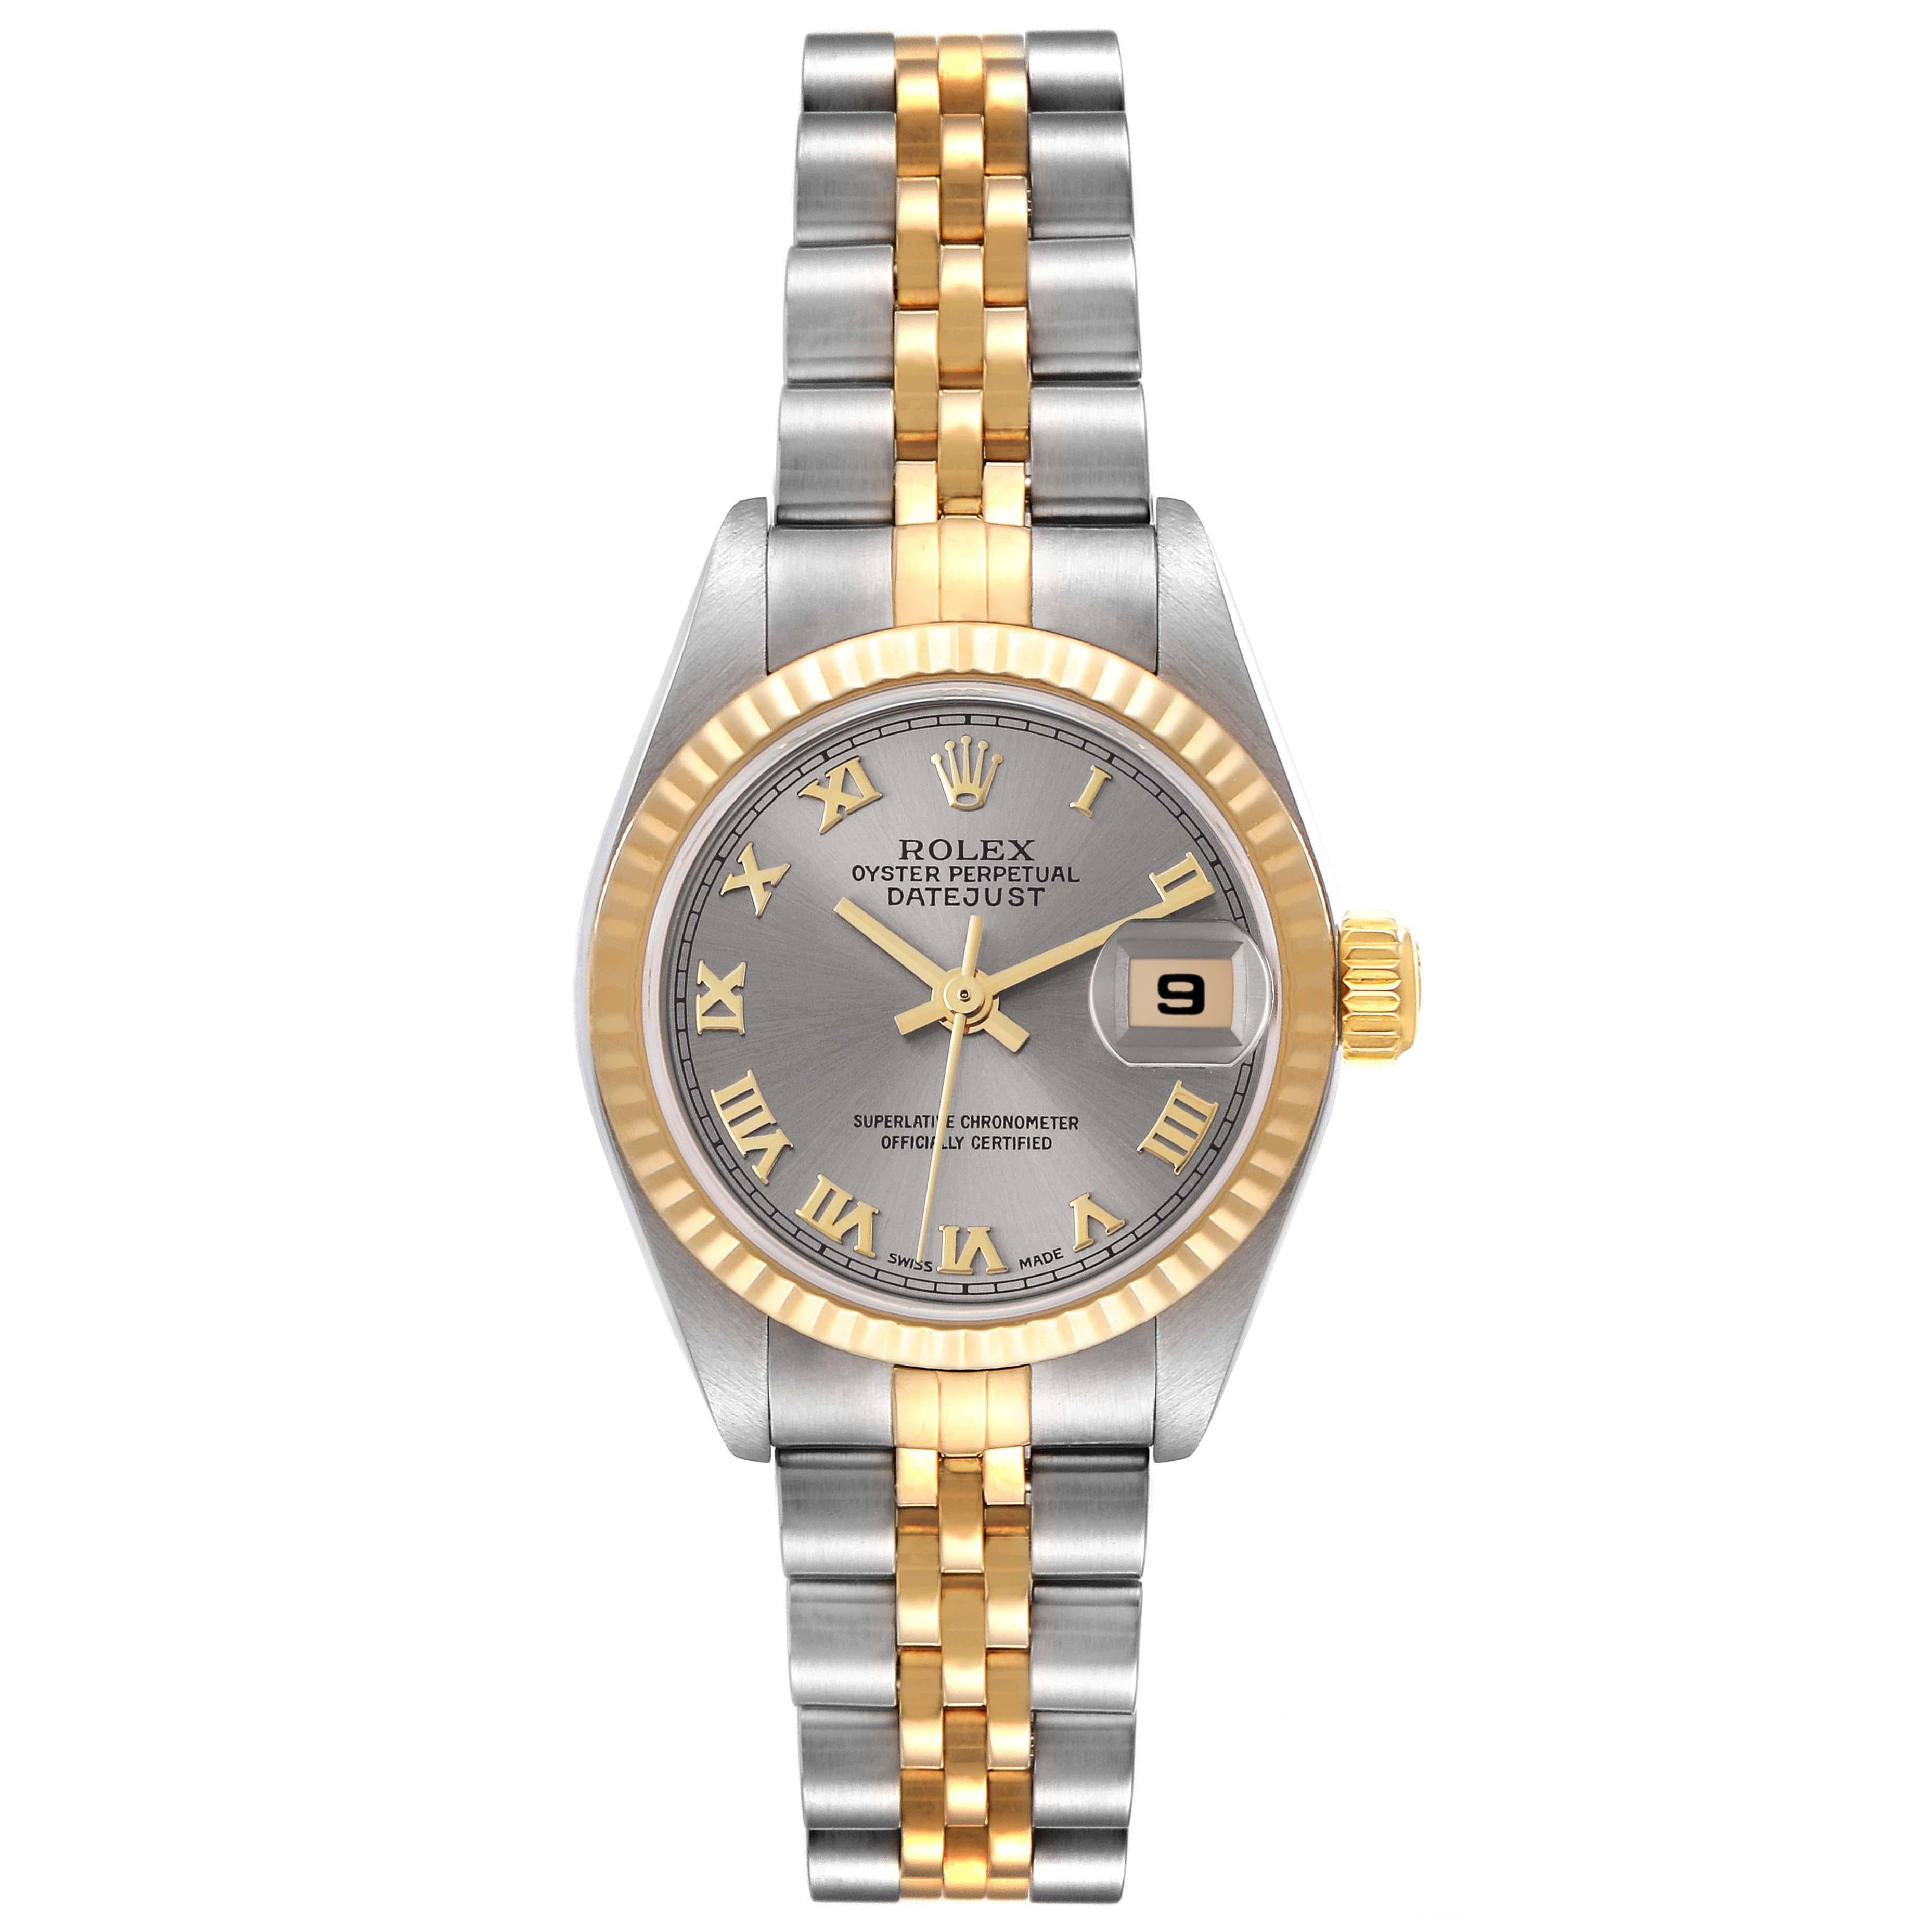 Rolex Datejust Steel Yellow Gold Slate Dial Ladies Watch 79173. Officially certified chronometer self-winding movement. Stainless steel oyster case 26.0 mm in diameter. Rolex logo on a 18K yellow gold crown. 18k yellow gold fluted bezel. Scratch